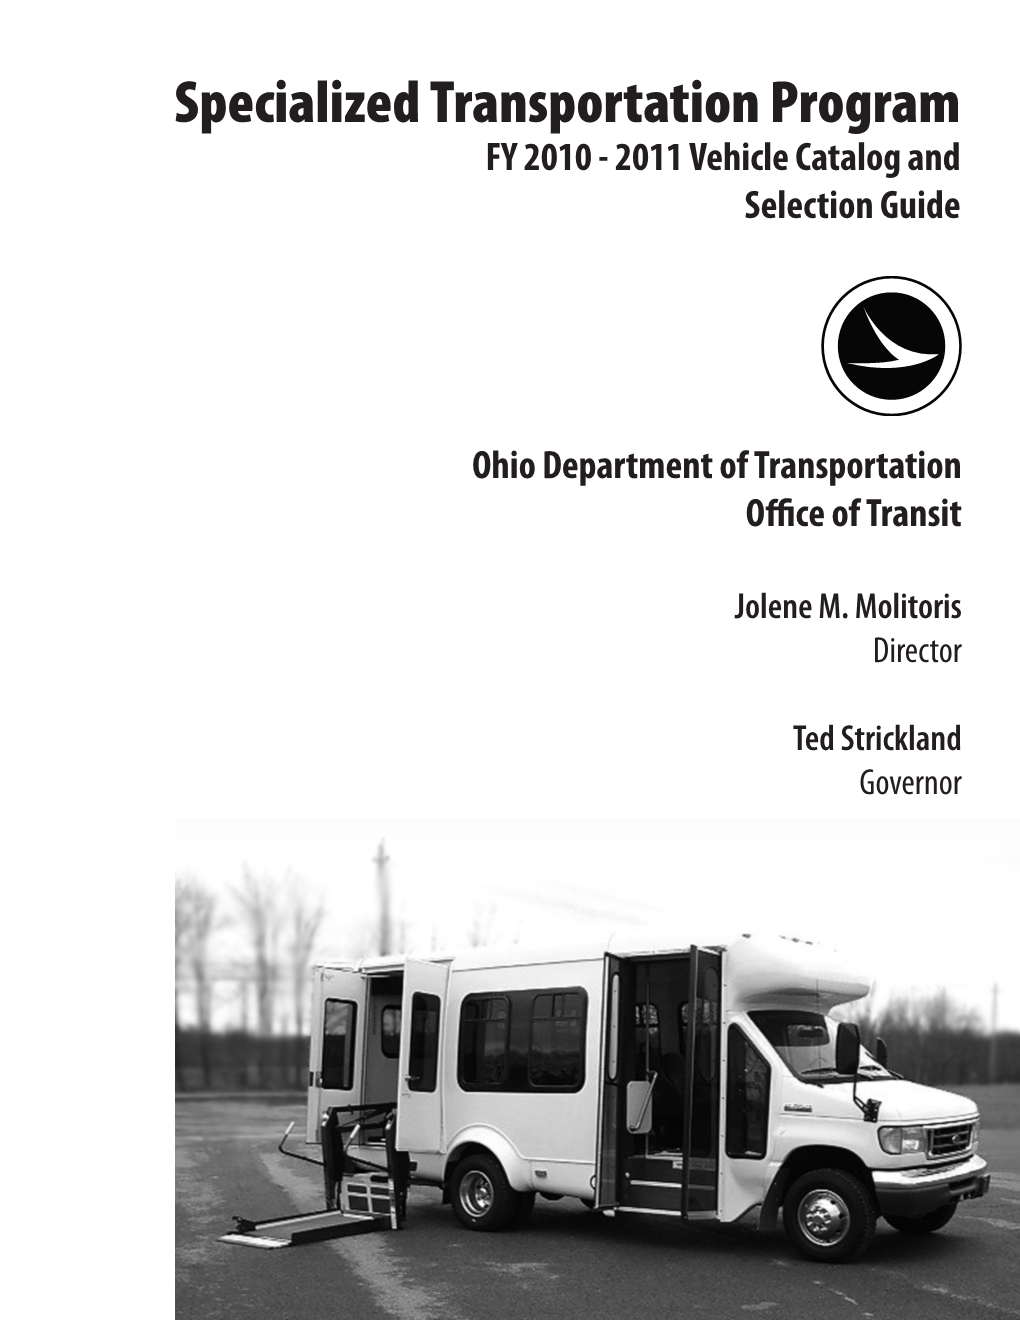 Specialized Transportation Program FY 2010 - 2011 Vehicle Catalog and Selection Guide